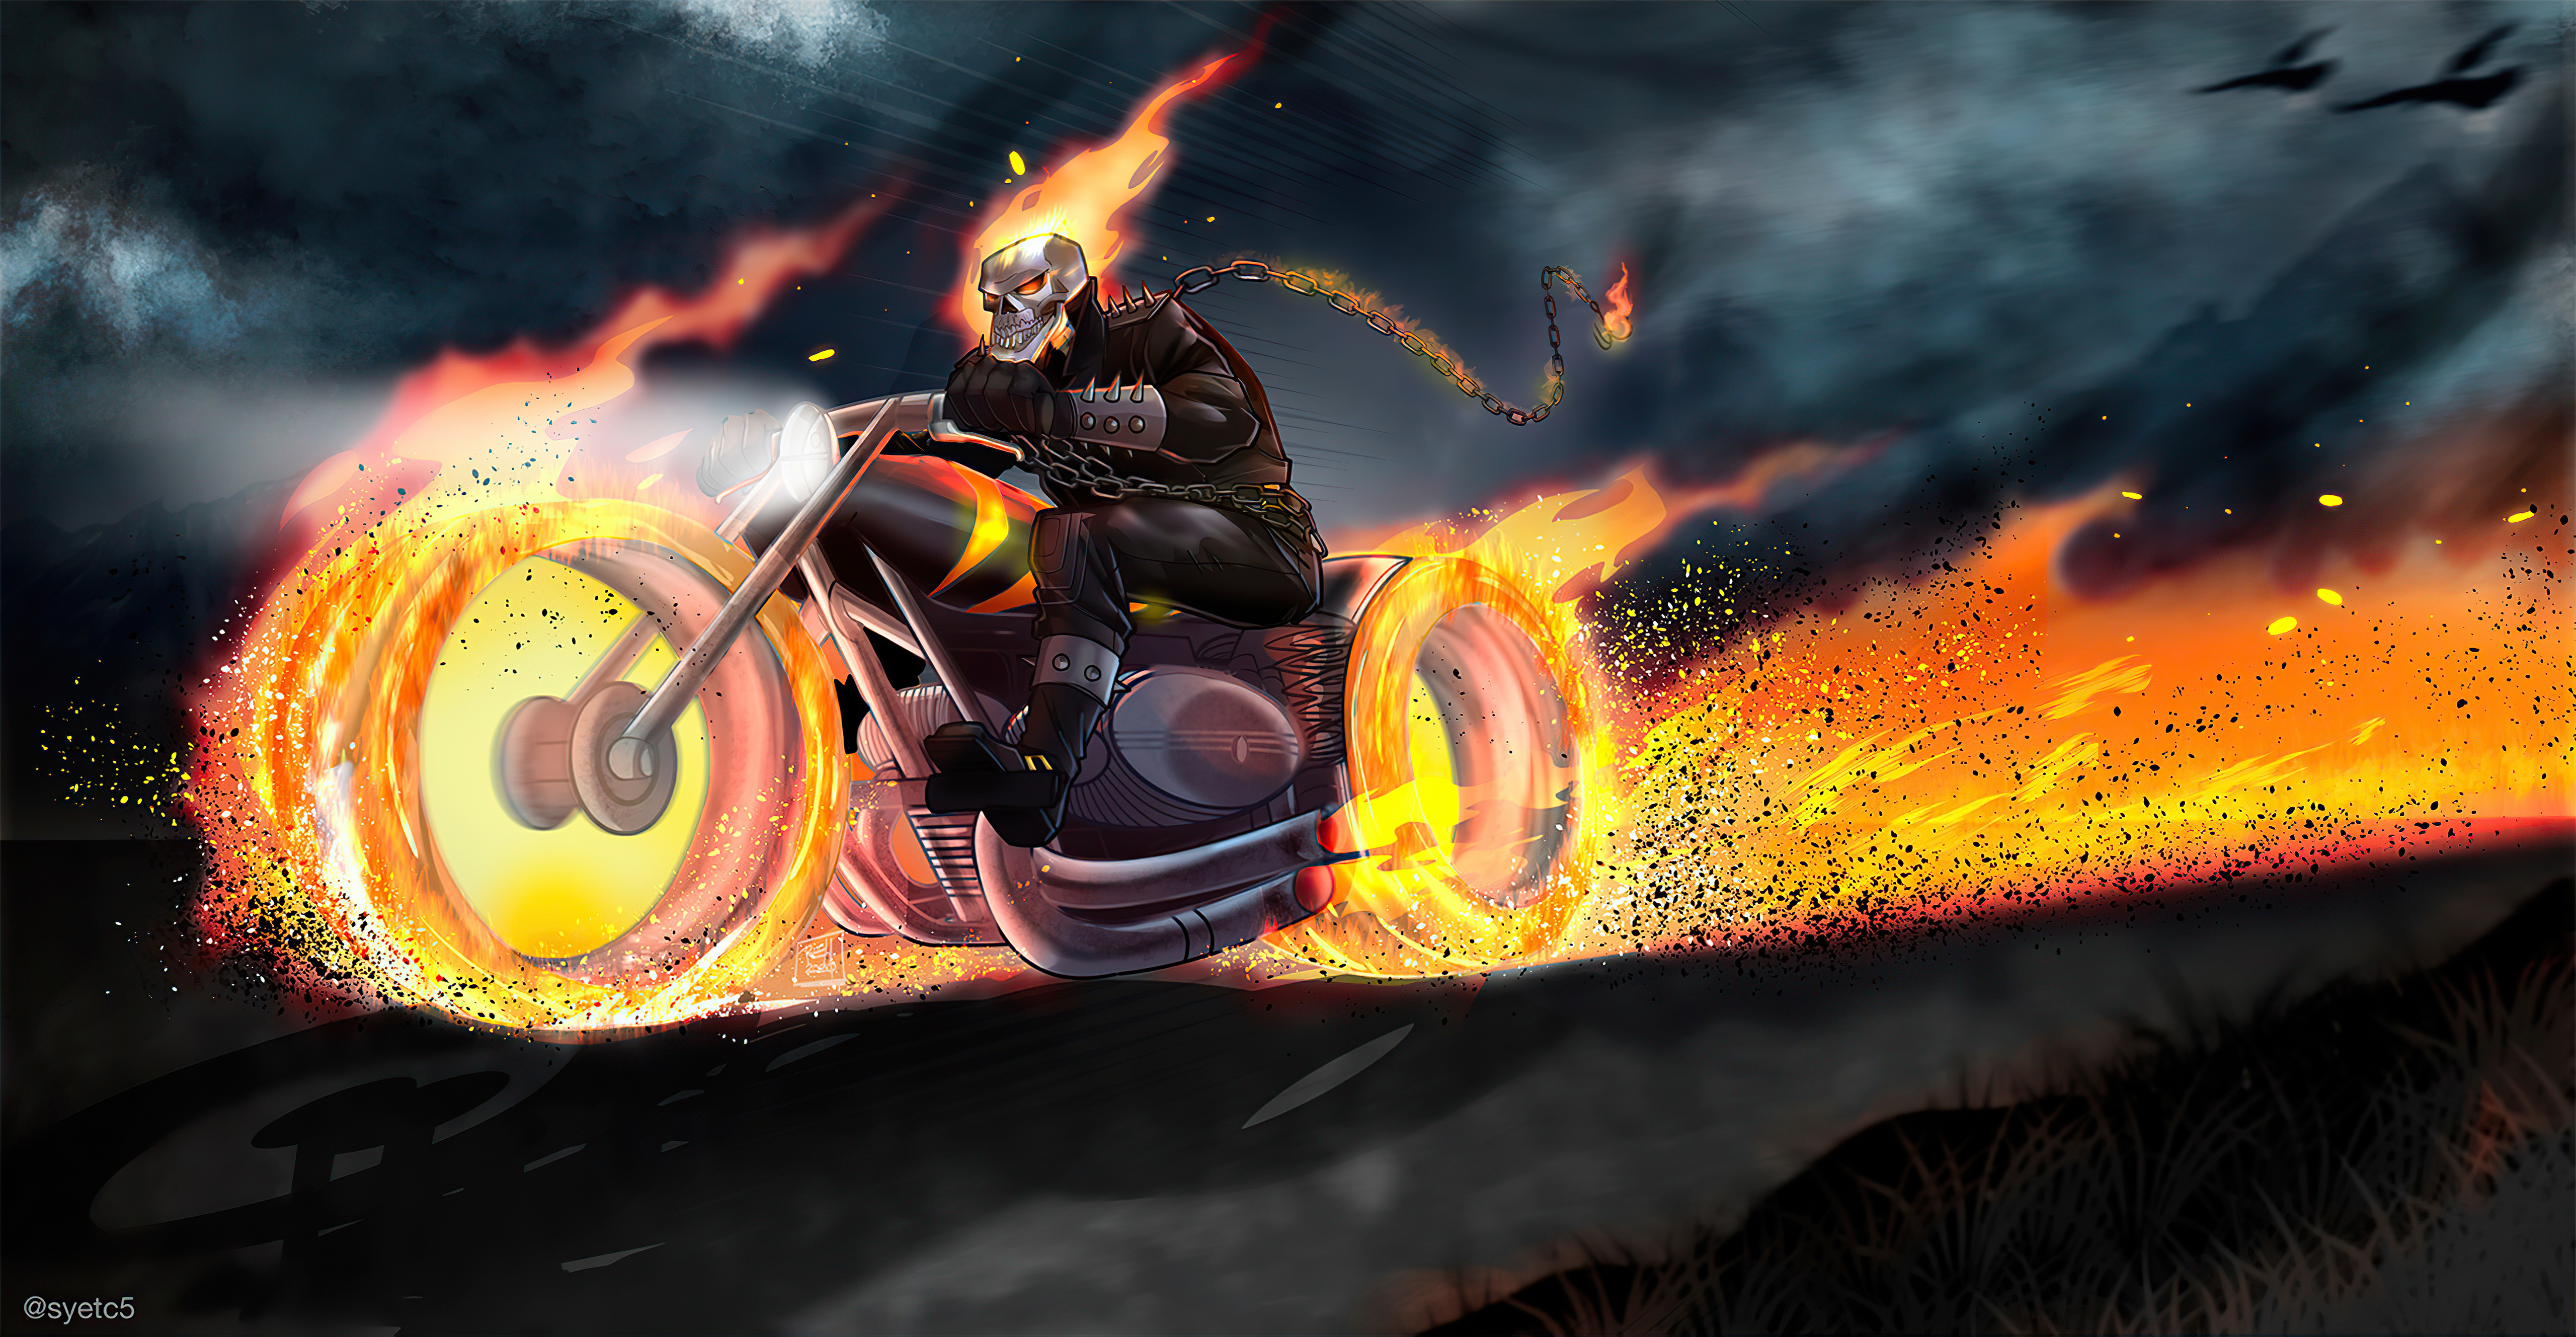 Ghostrider On Bike 5k, HD Superheroes, 4k Wallpapers, Images, Backgrounds,  Photos and Pictures